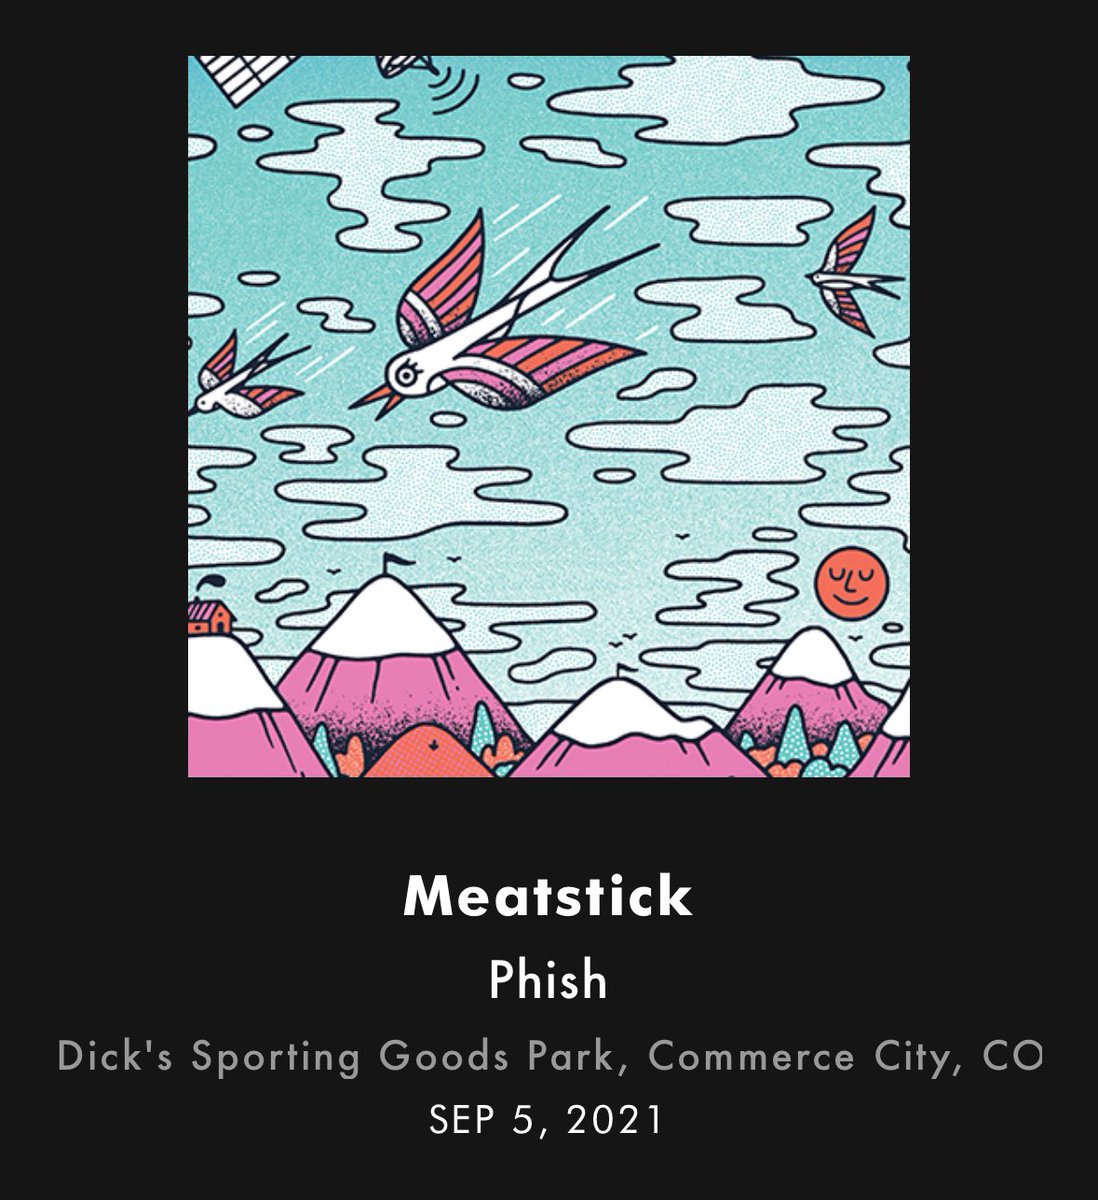 Meatstick with Catapult and Lonely Trip teases 🤯